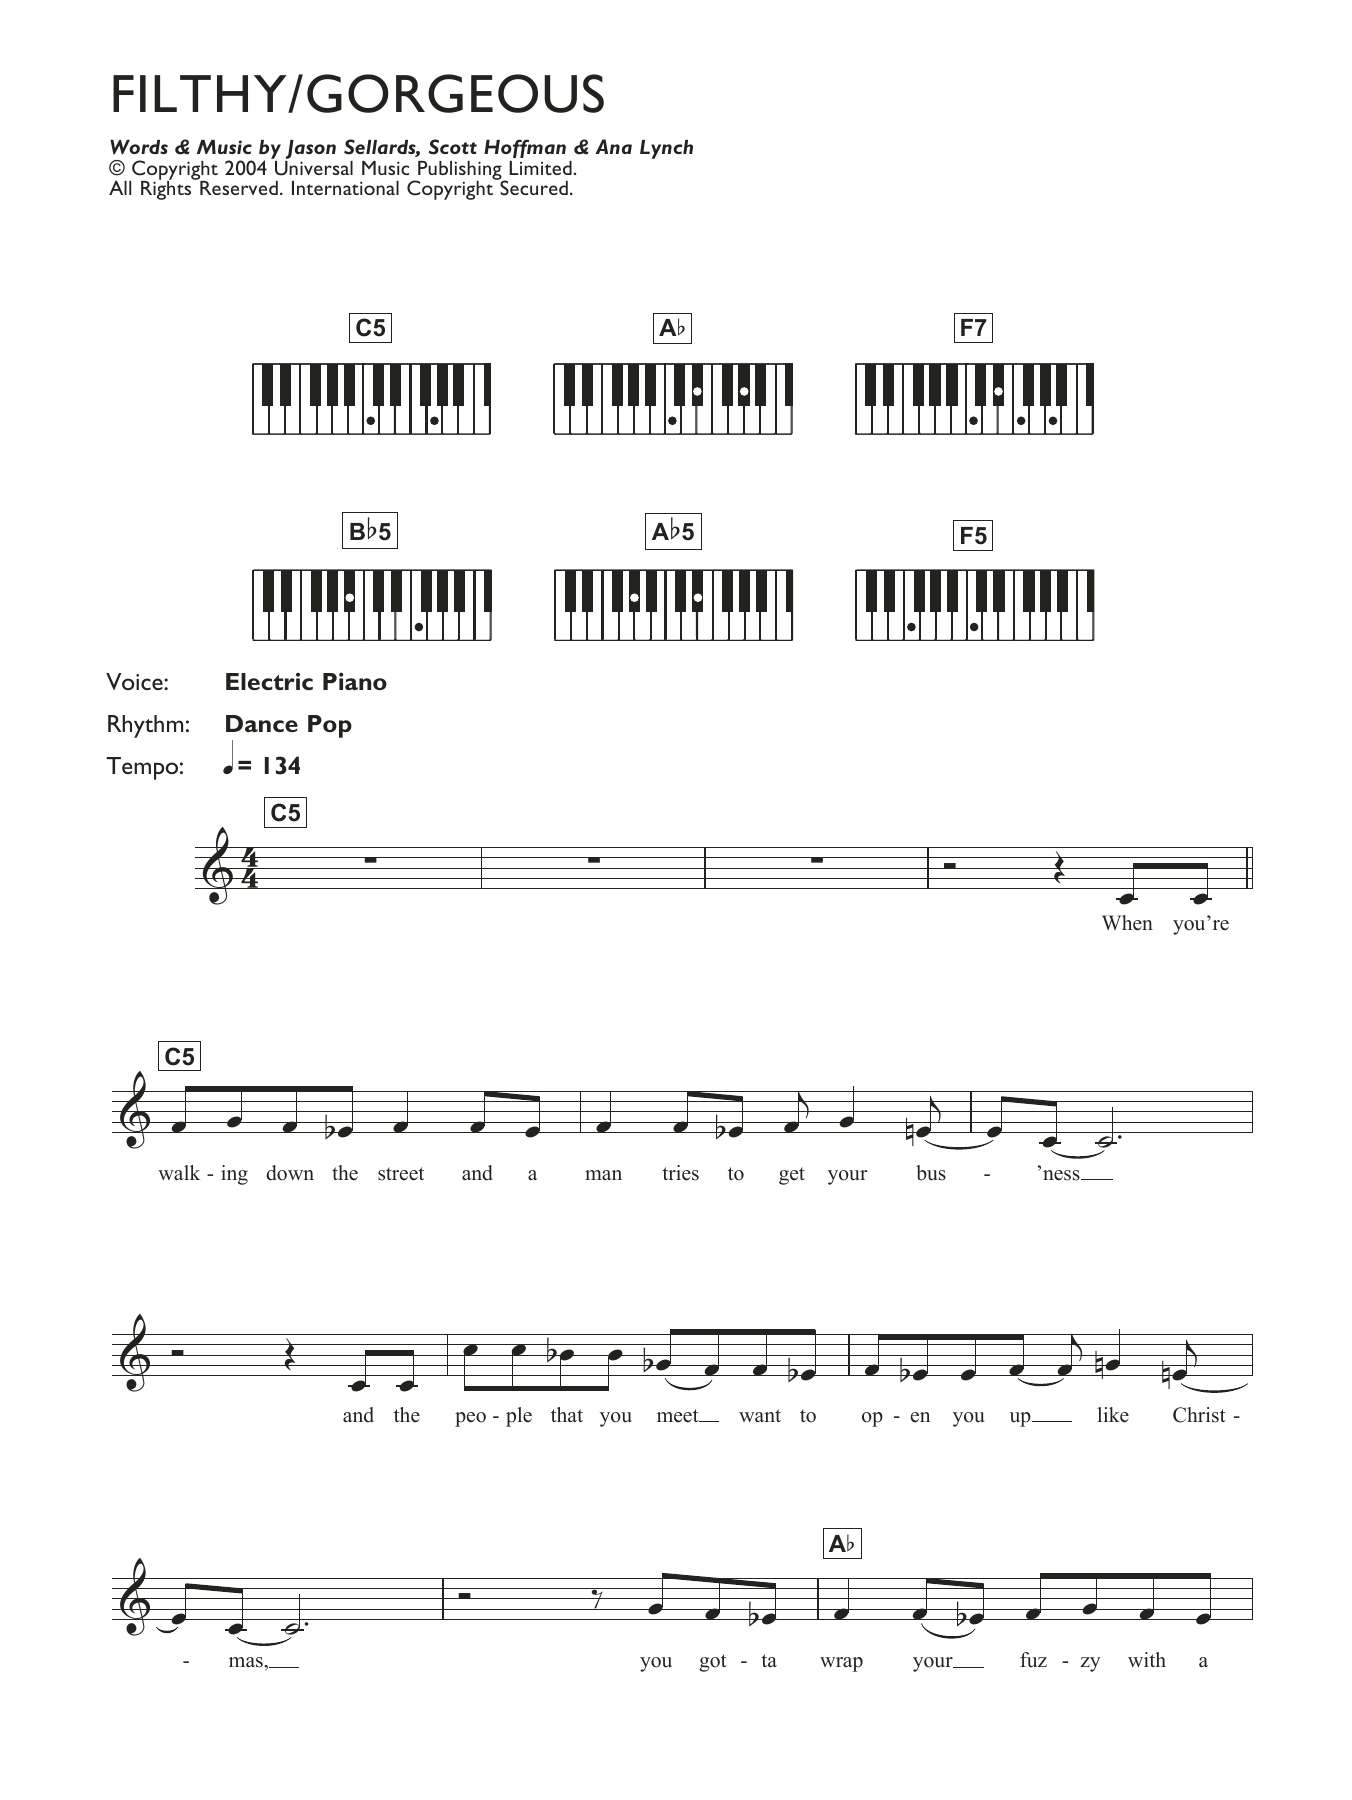 Download Scissor Sisters Filthy/Gorgeous Sheet Music